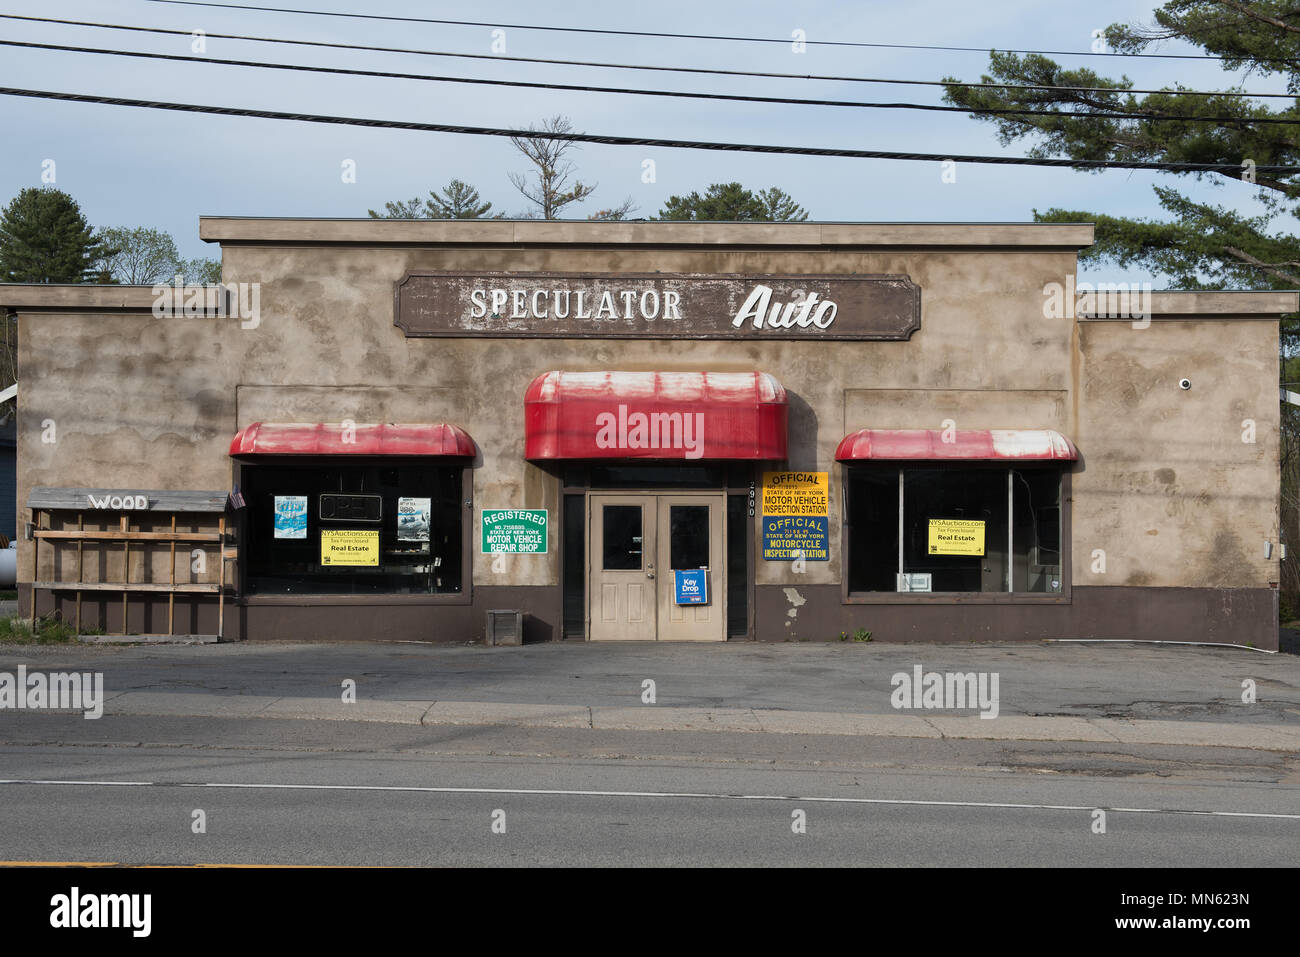 A building from a failed business up for auction due to tax foreclosure in Speculator, NY USA Stock Photo